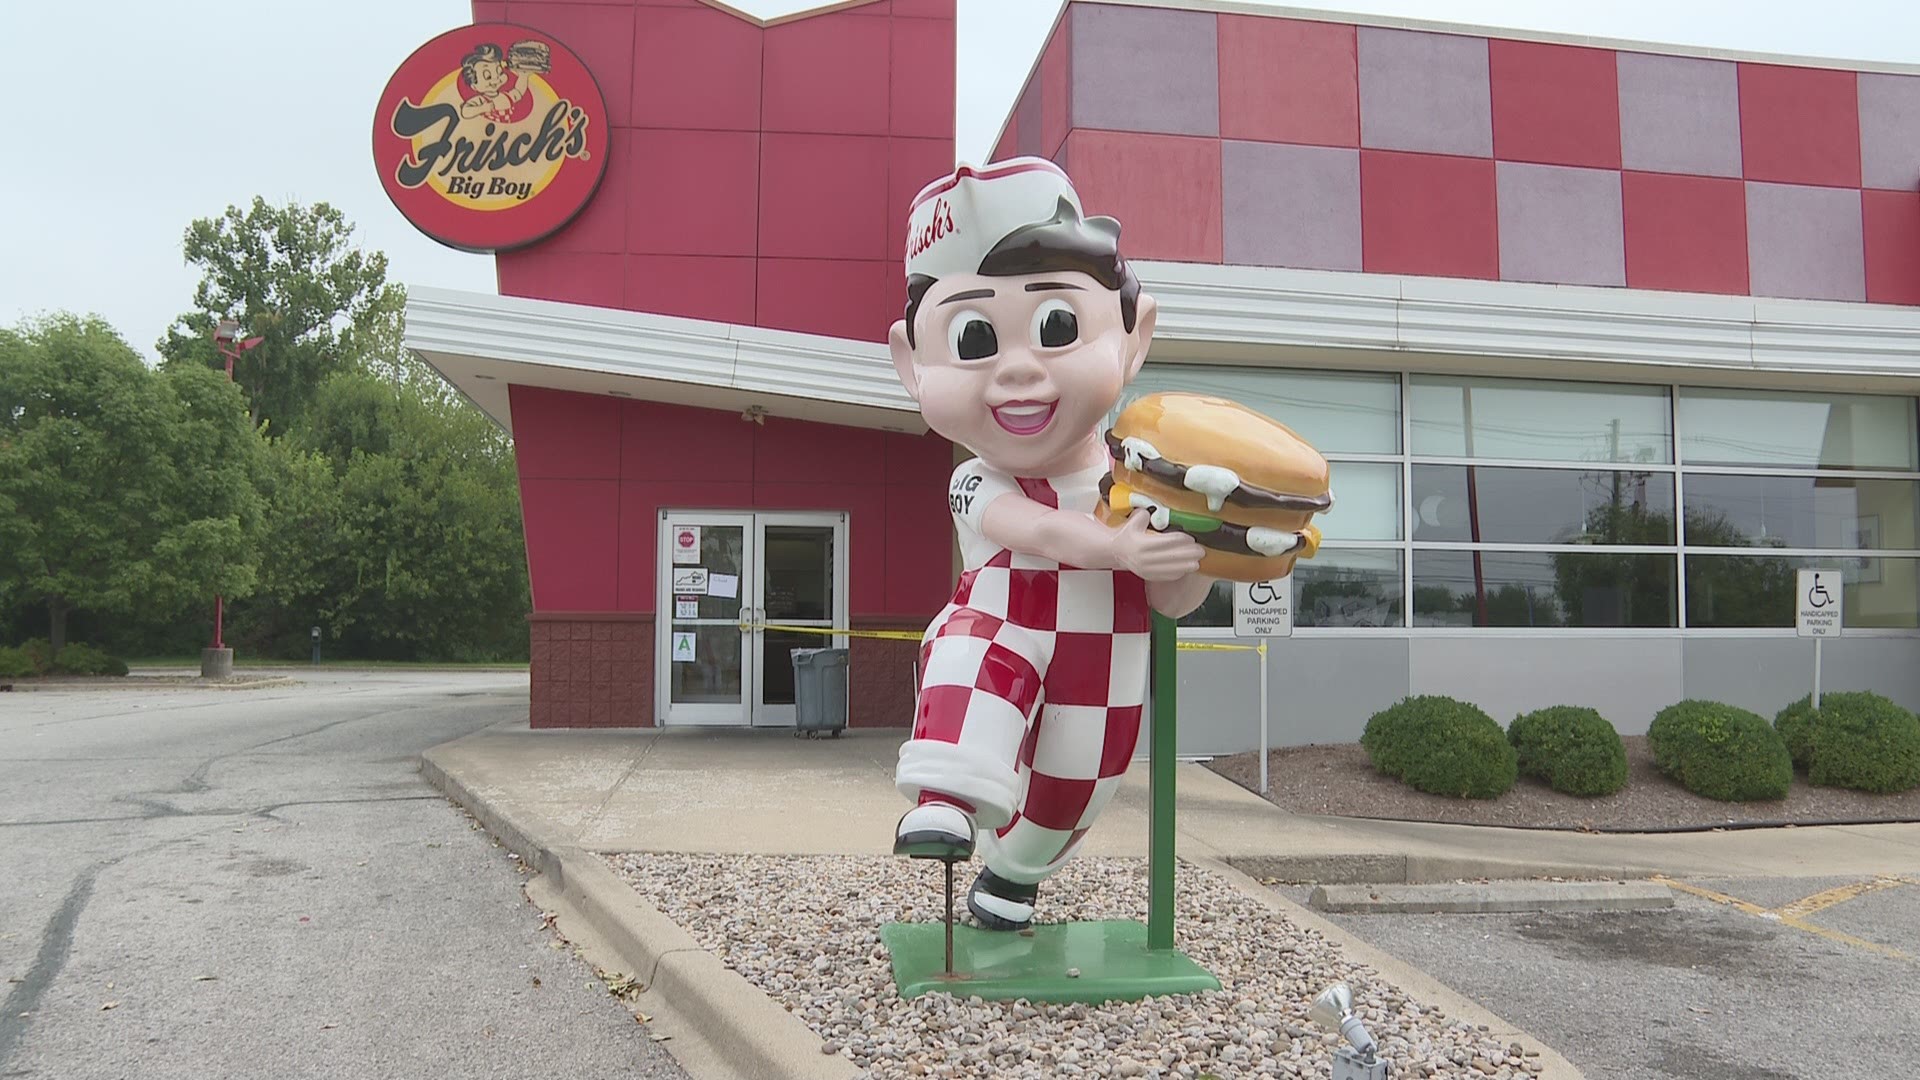 Police are investigating a Saturday morning break-in at a Frisch's Big Boy on Dixie Highway.